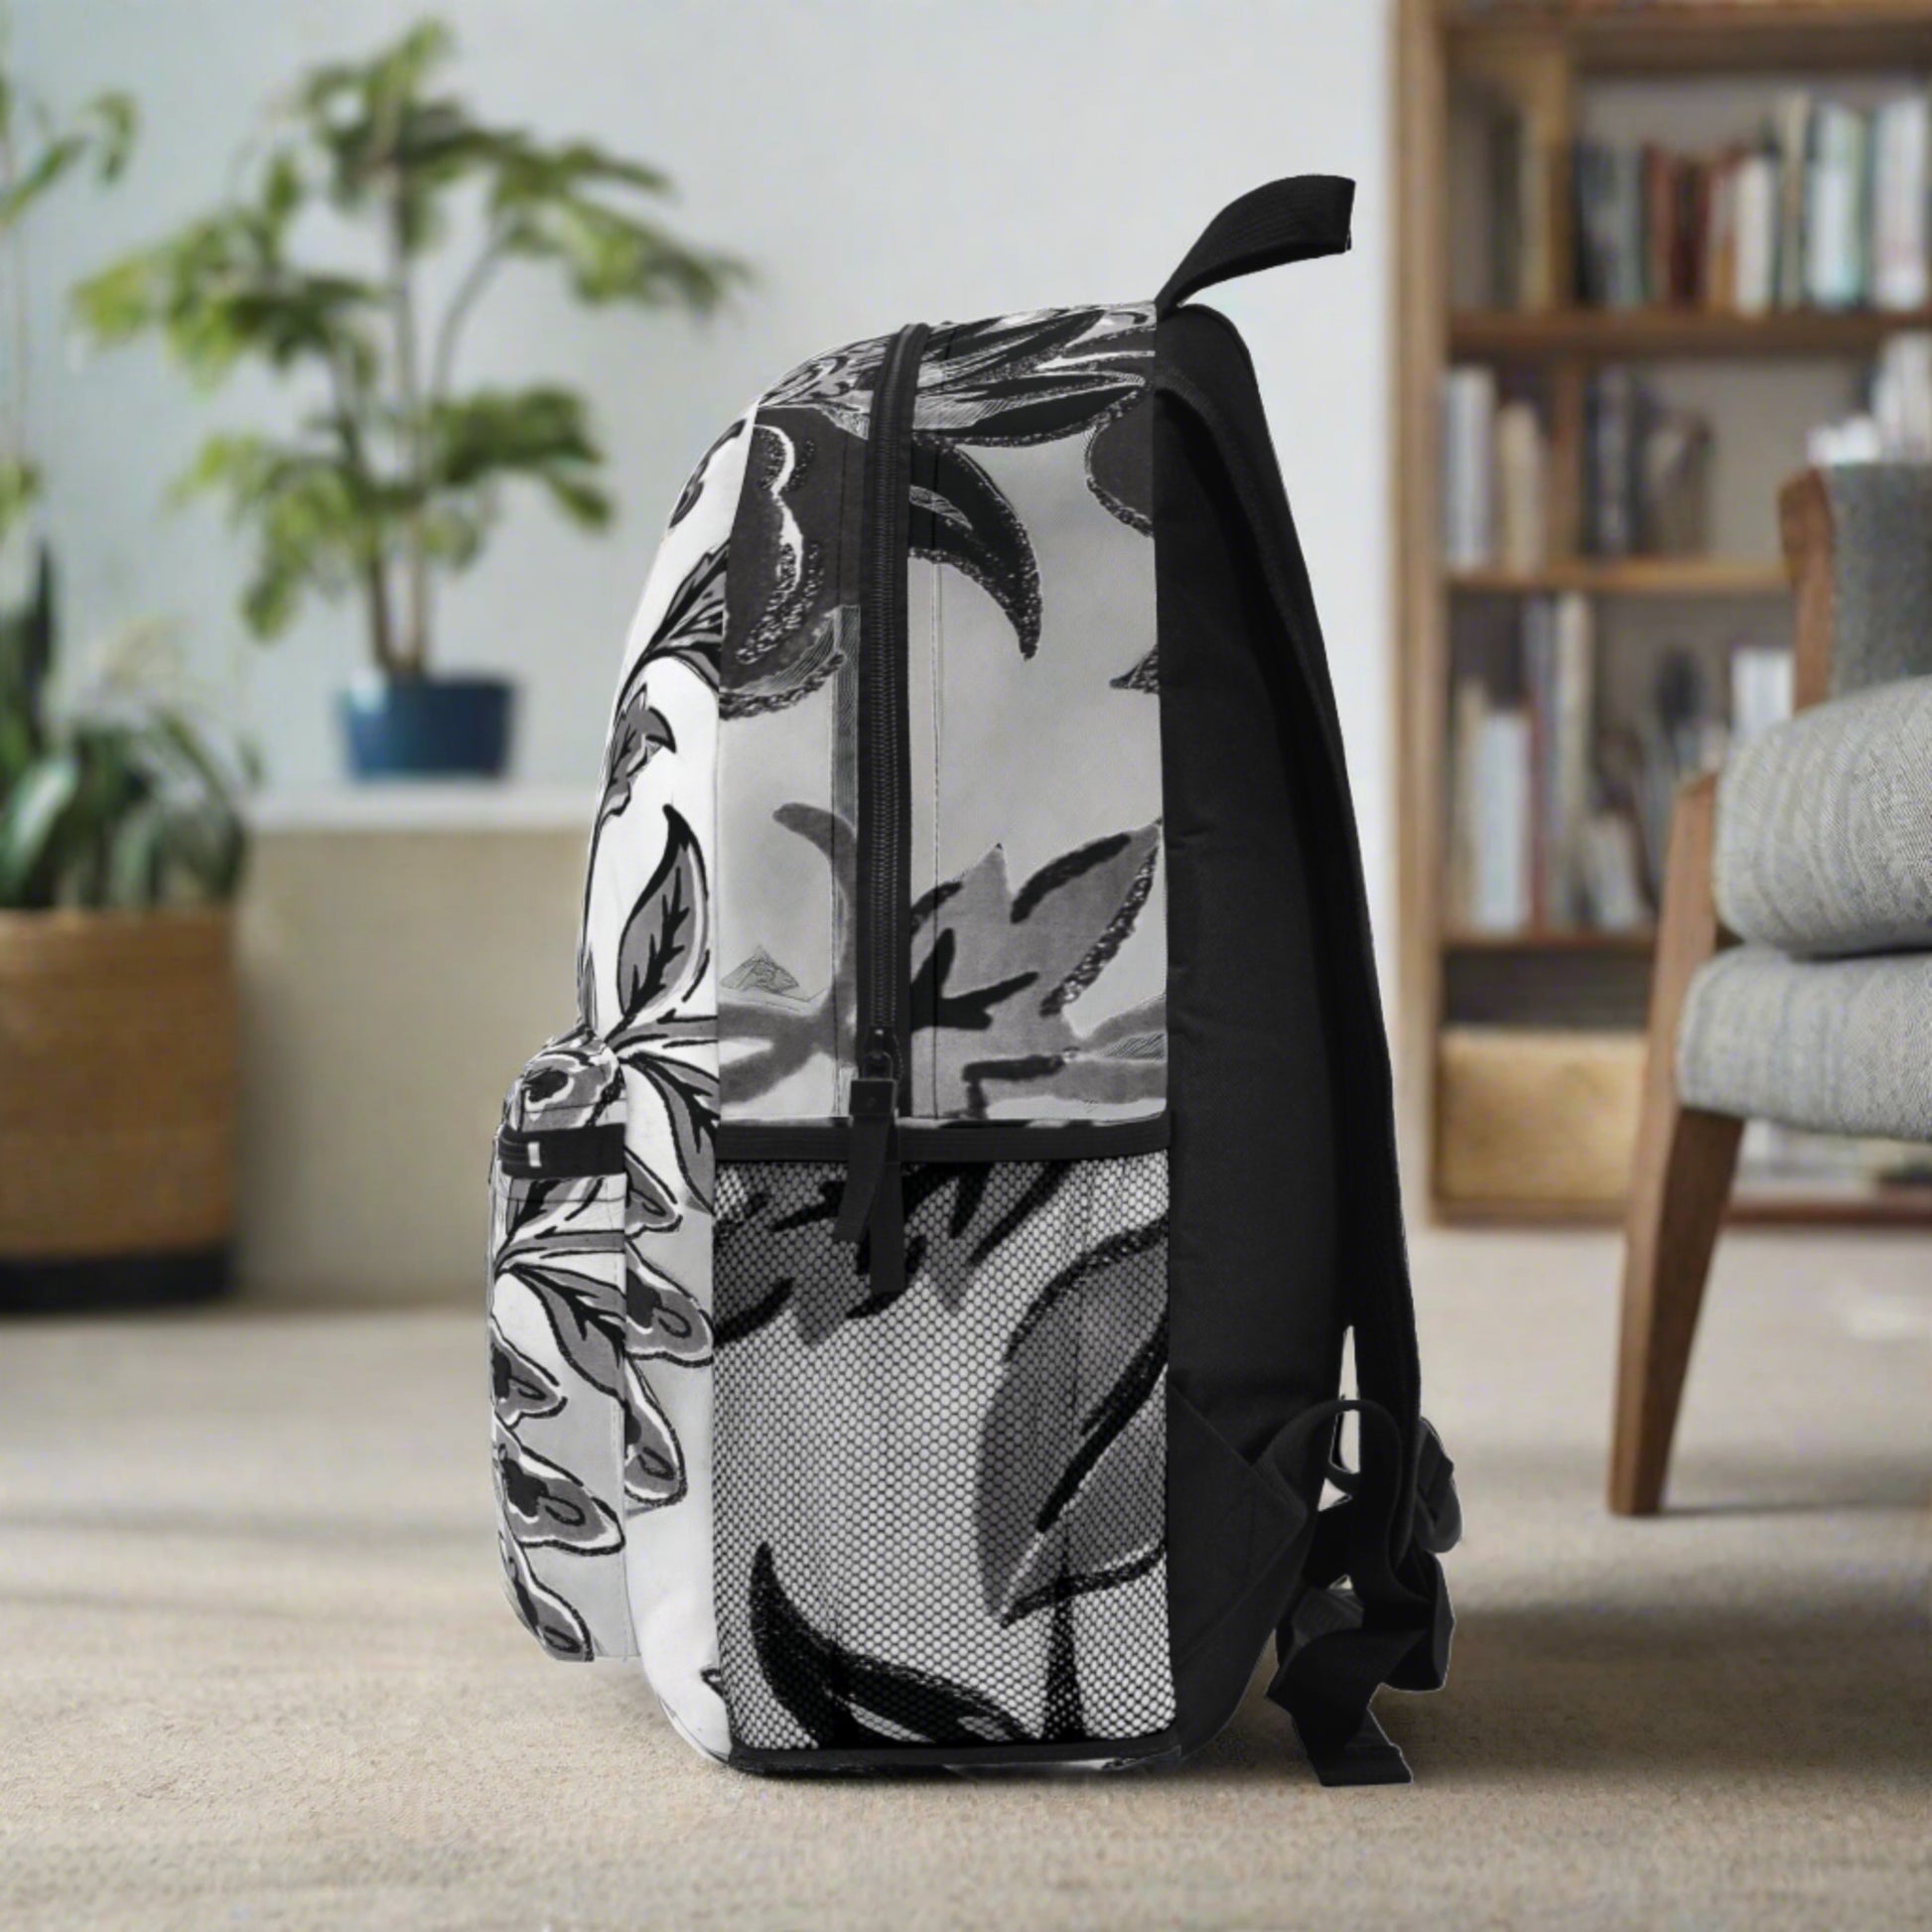 Black & white flowers are all over printed bold & clear into the durable canvas material ... beautiful and sturdy backpack with compartments and zippered front pocket - flowered decorative black & white pattern for retro lovers.